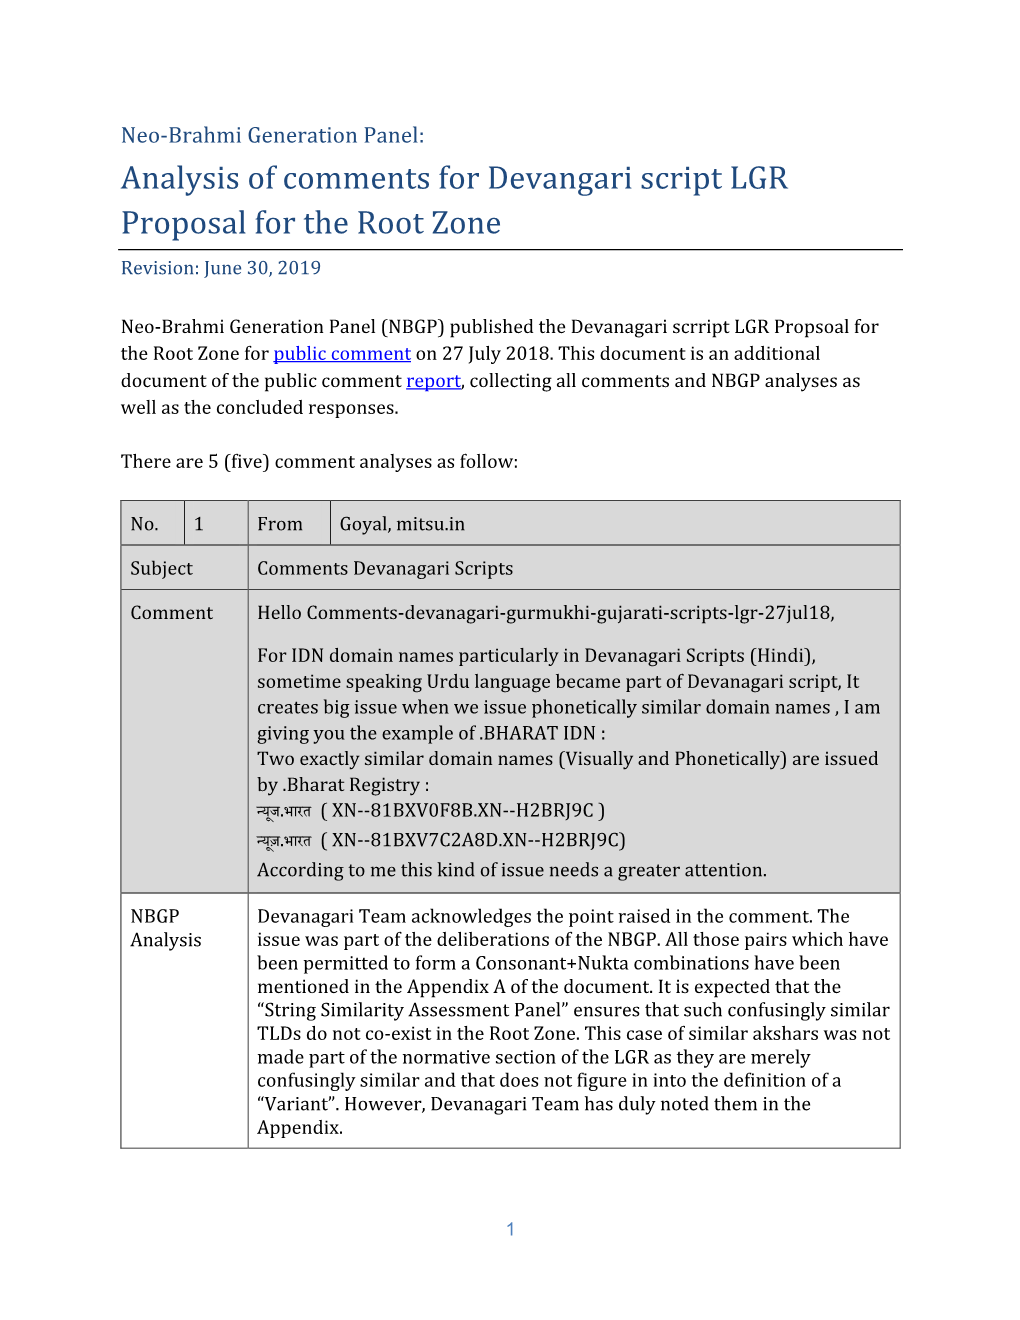 Analysis of Comments for Devangari Script LGR Proposal for the Root Zone Revision: June 30, 2019